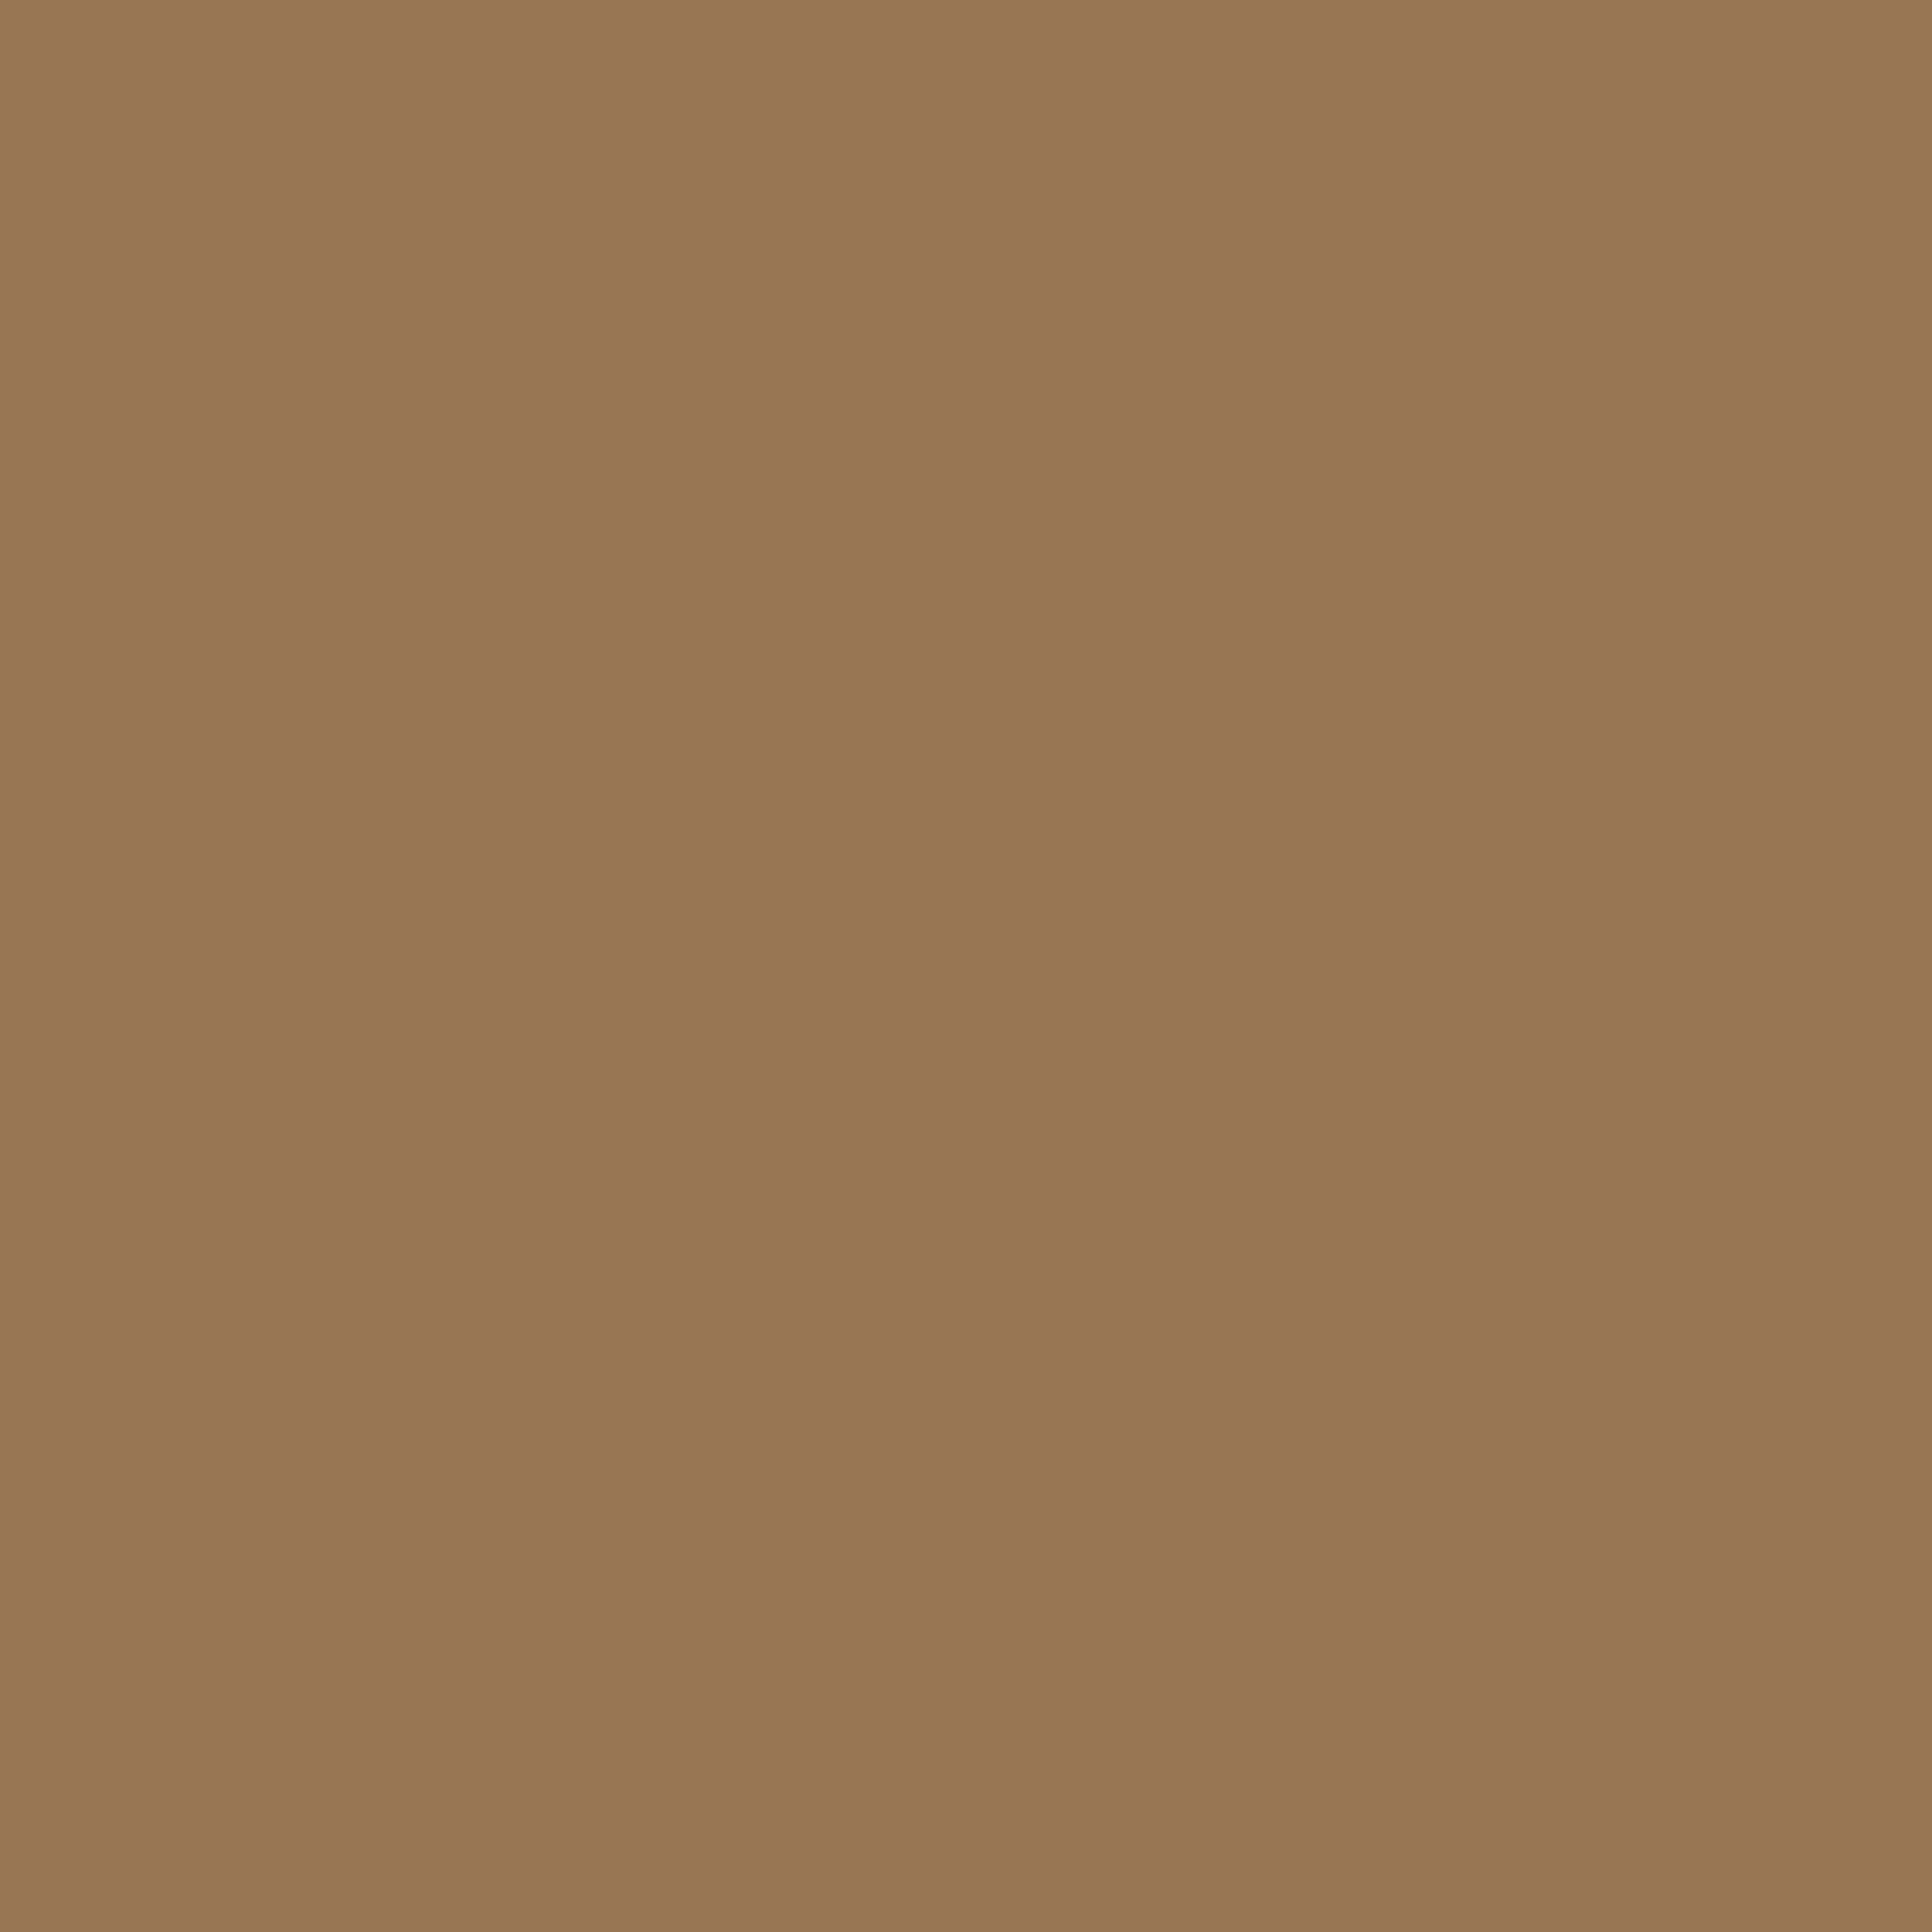 2048x2048 Pale Brown Solid Color Background